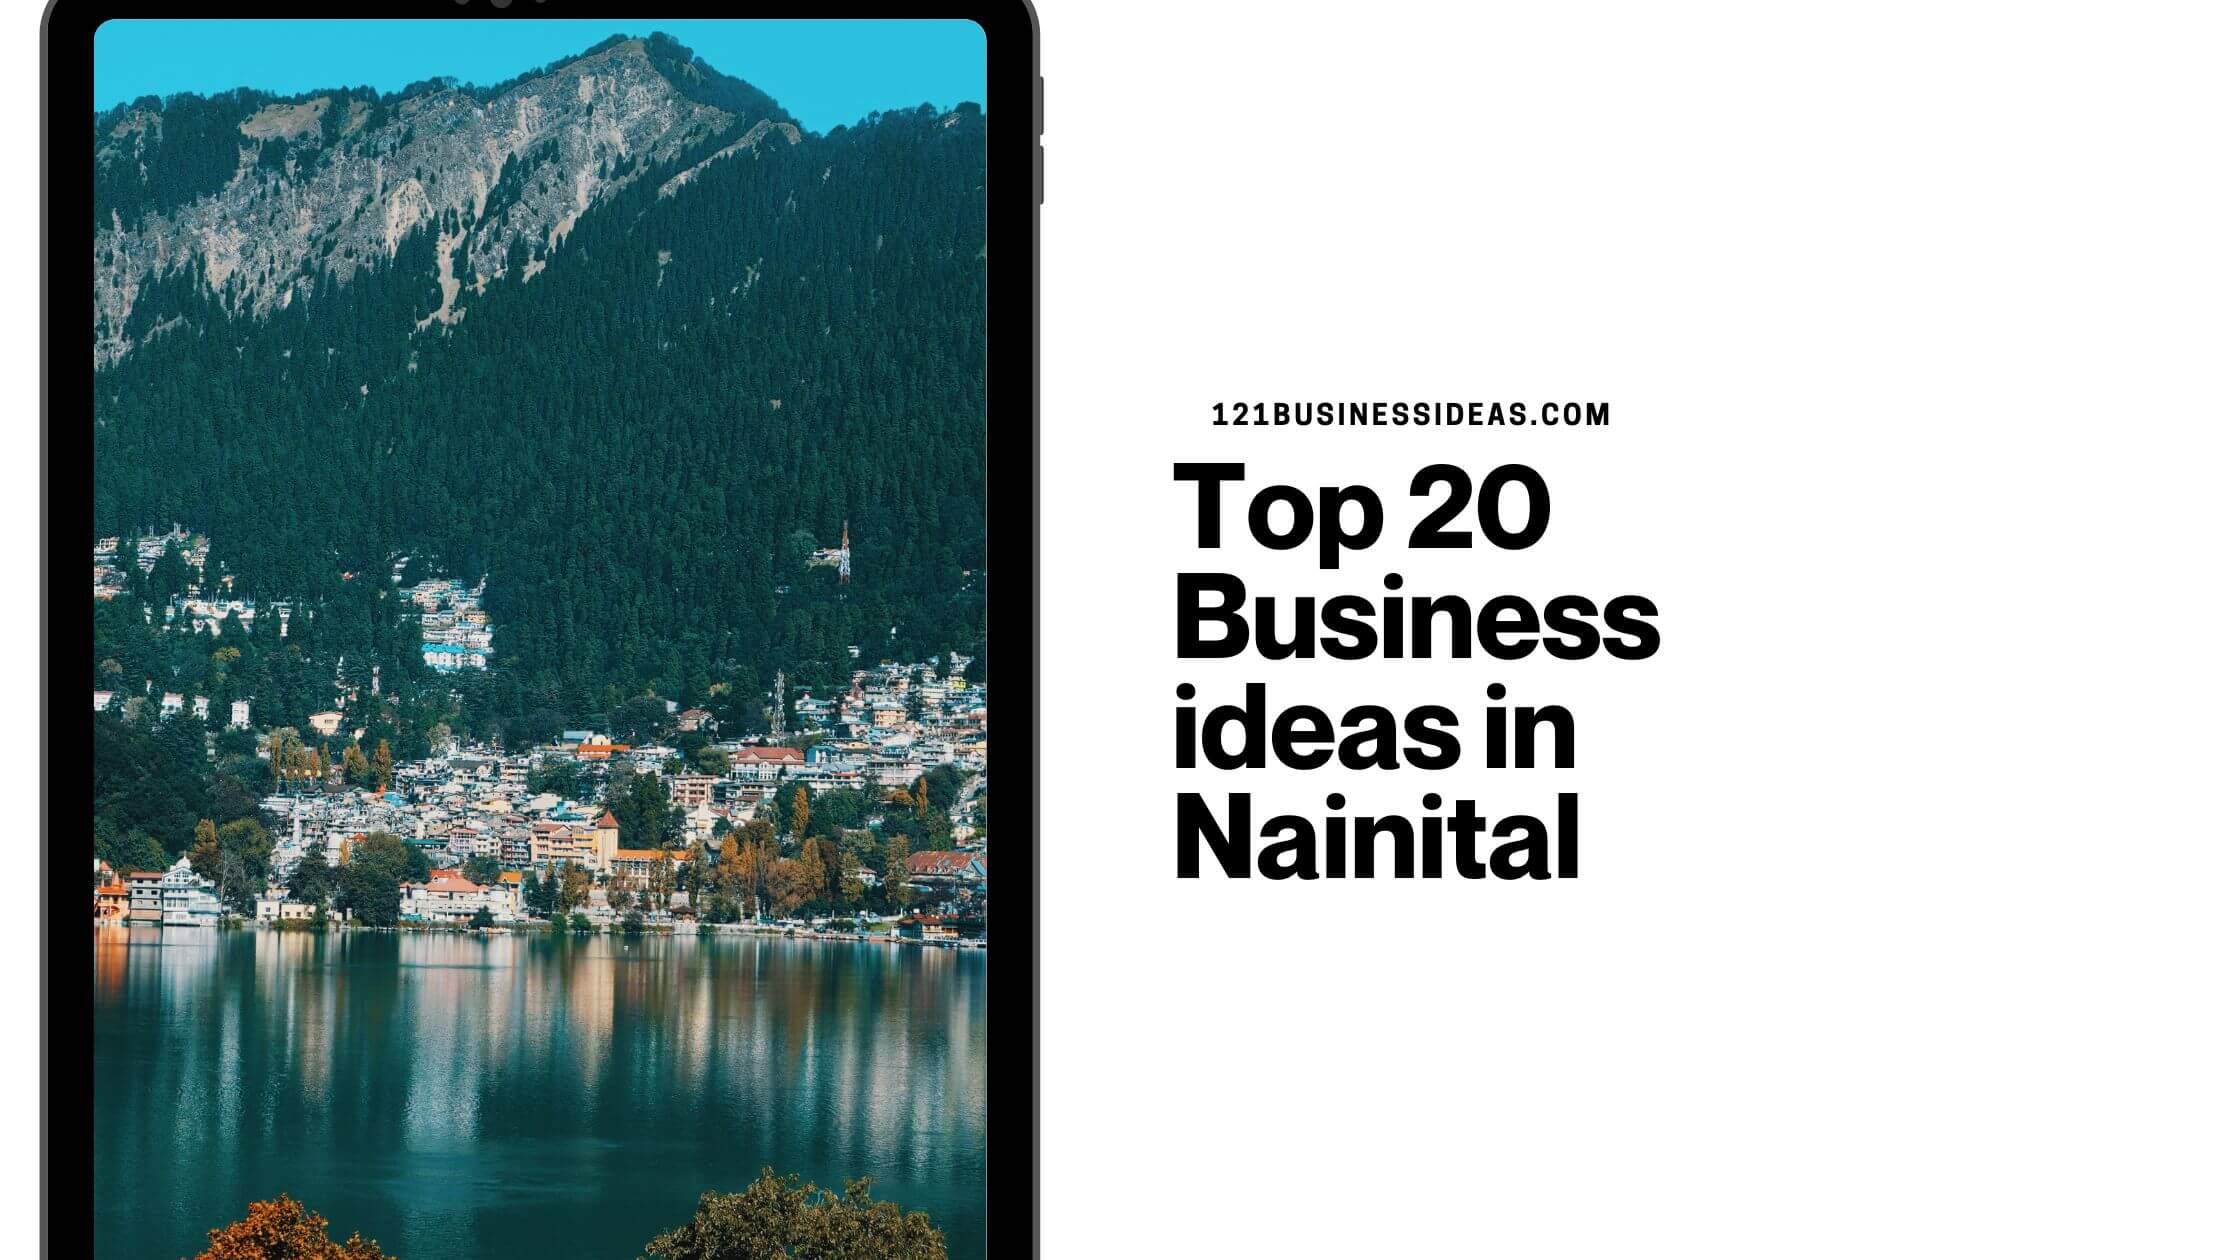 Top 20 Business ideas in Nainital (1)